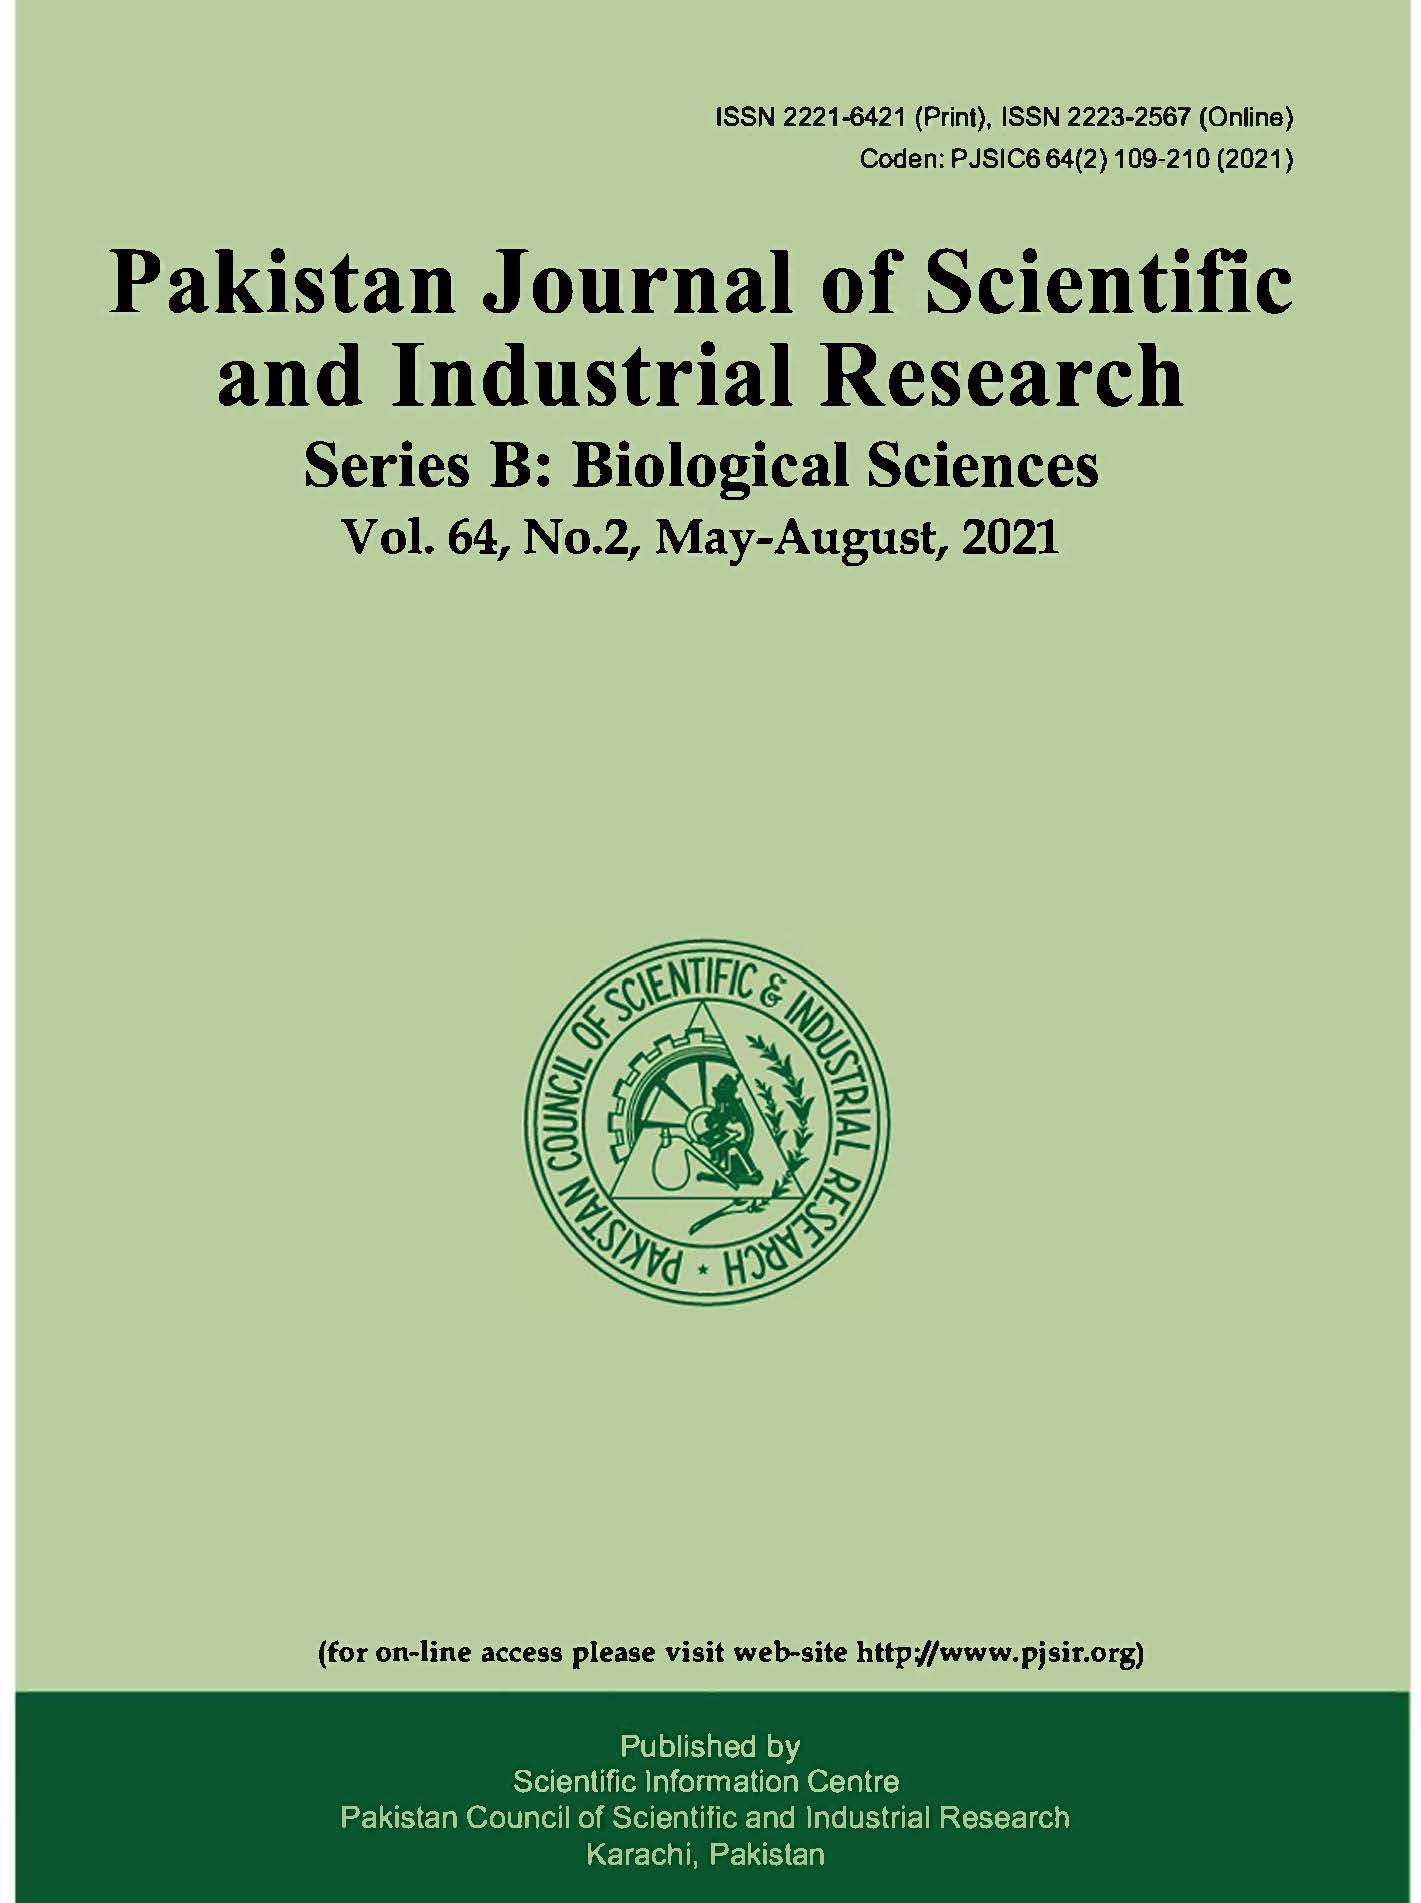 					View Vol. 64 No. 2 (2021): Pakistan Journal of Scientific and Industrial Research Series B: Biological Sciences
				